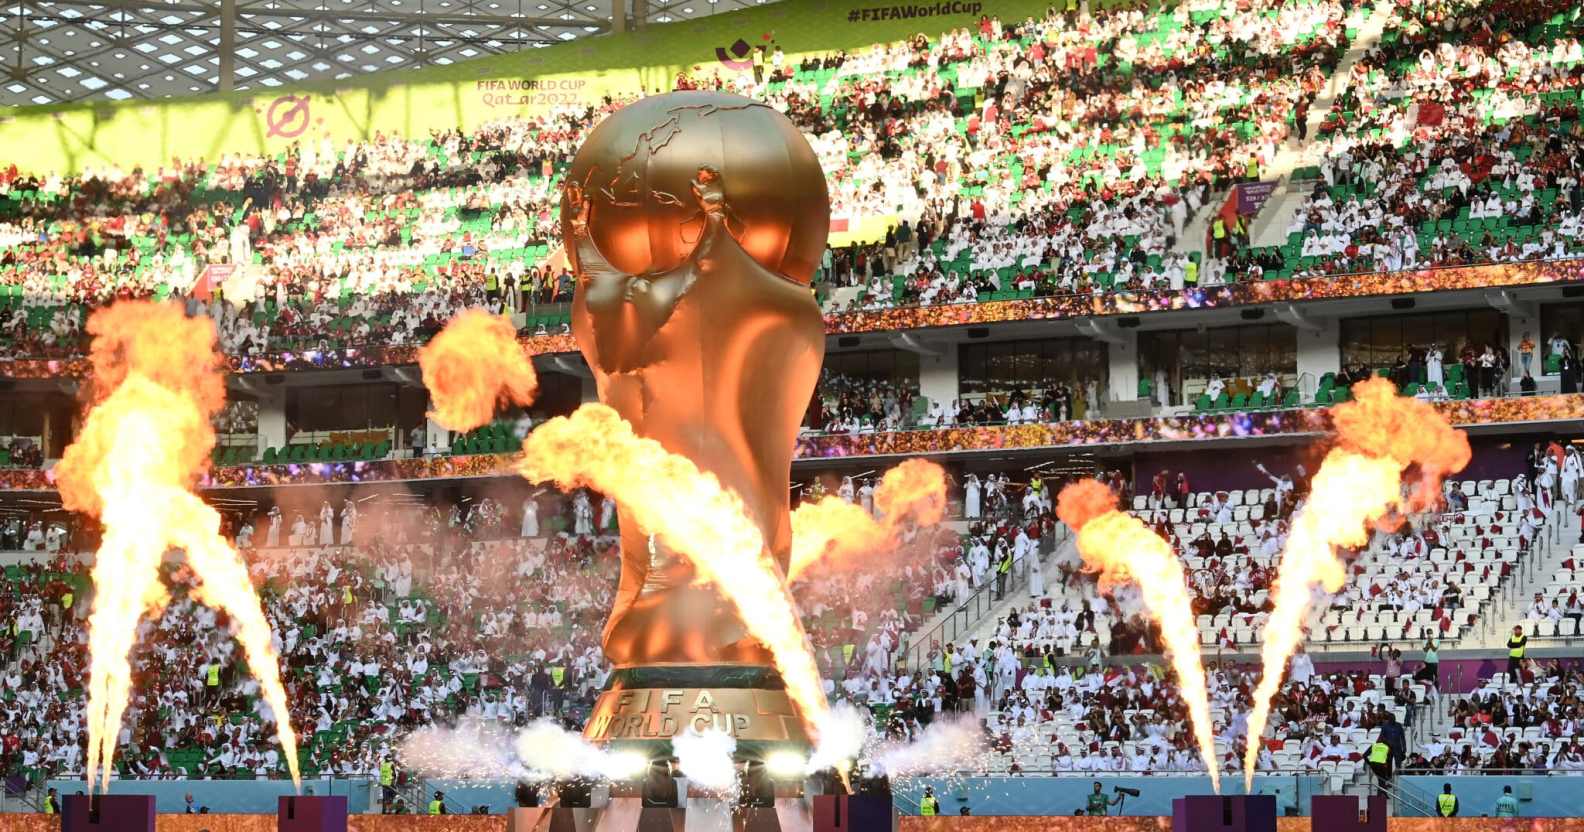 Pyrotechnics explode around a giant FIFA World Cup trophy prior to the FIFA World Cup Qatar 2022 Group A match between Qatar and Senegal